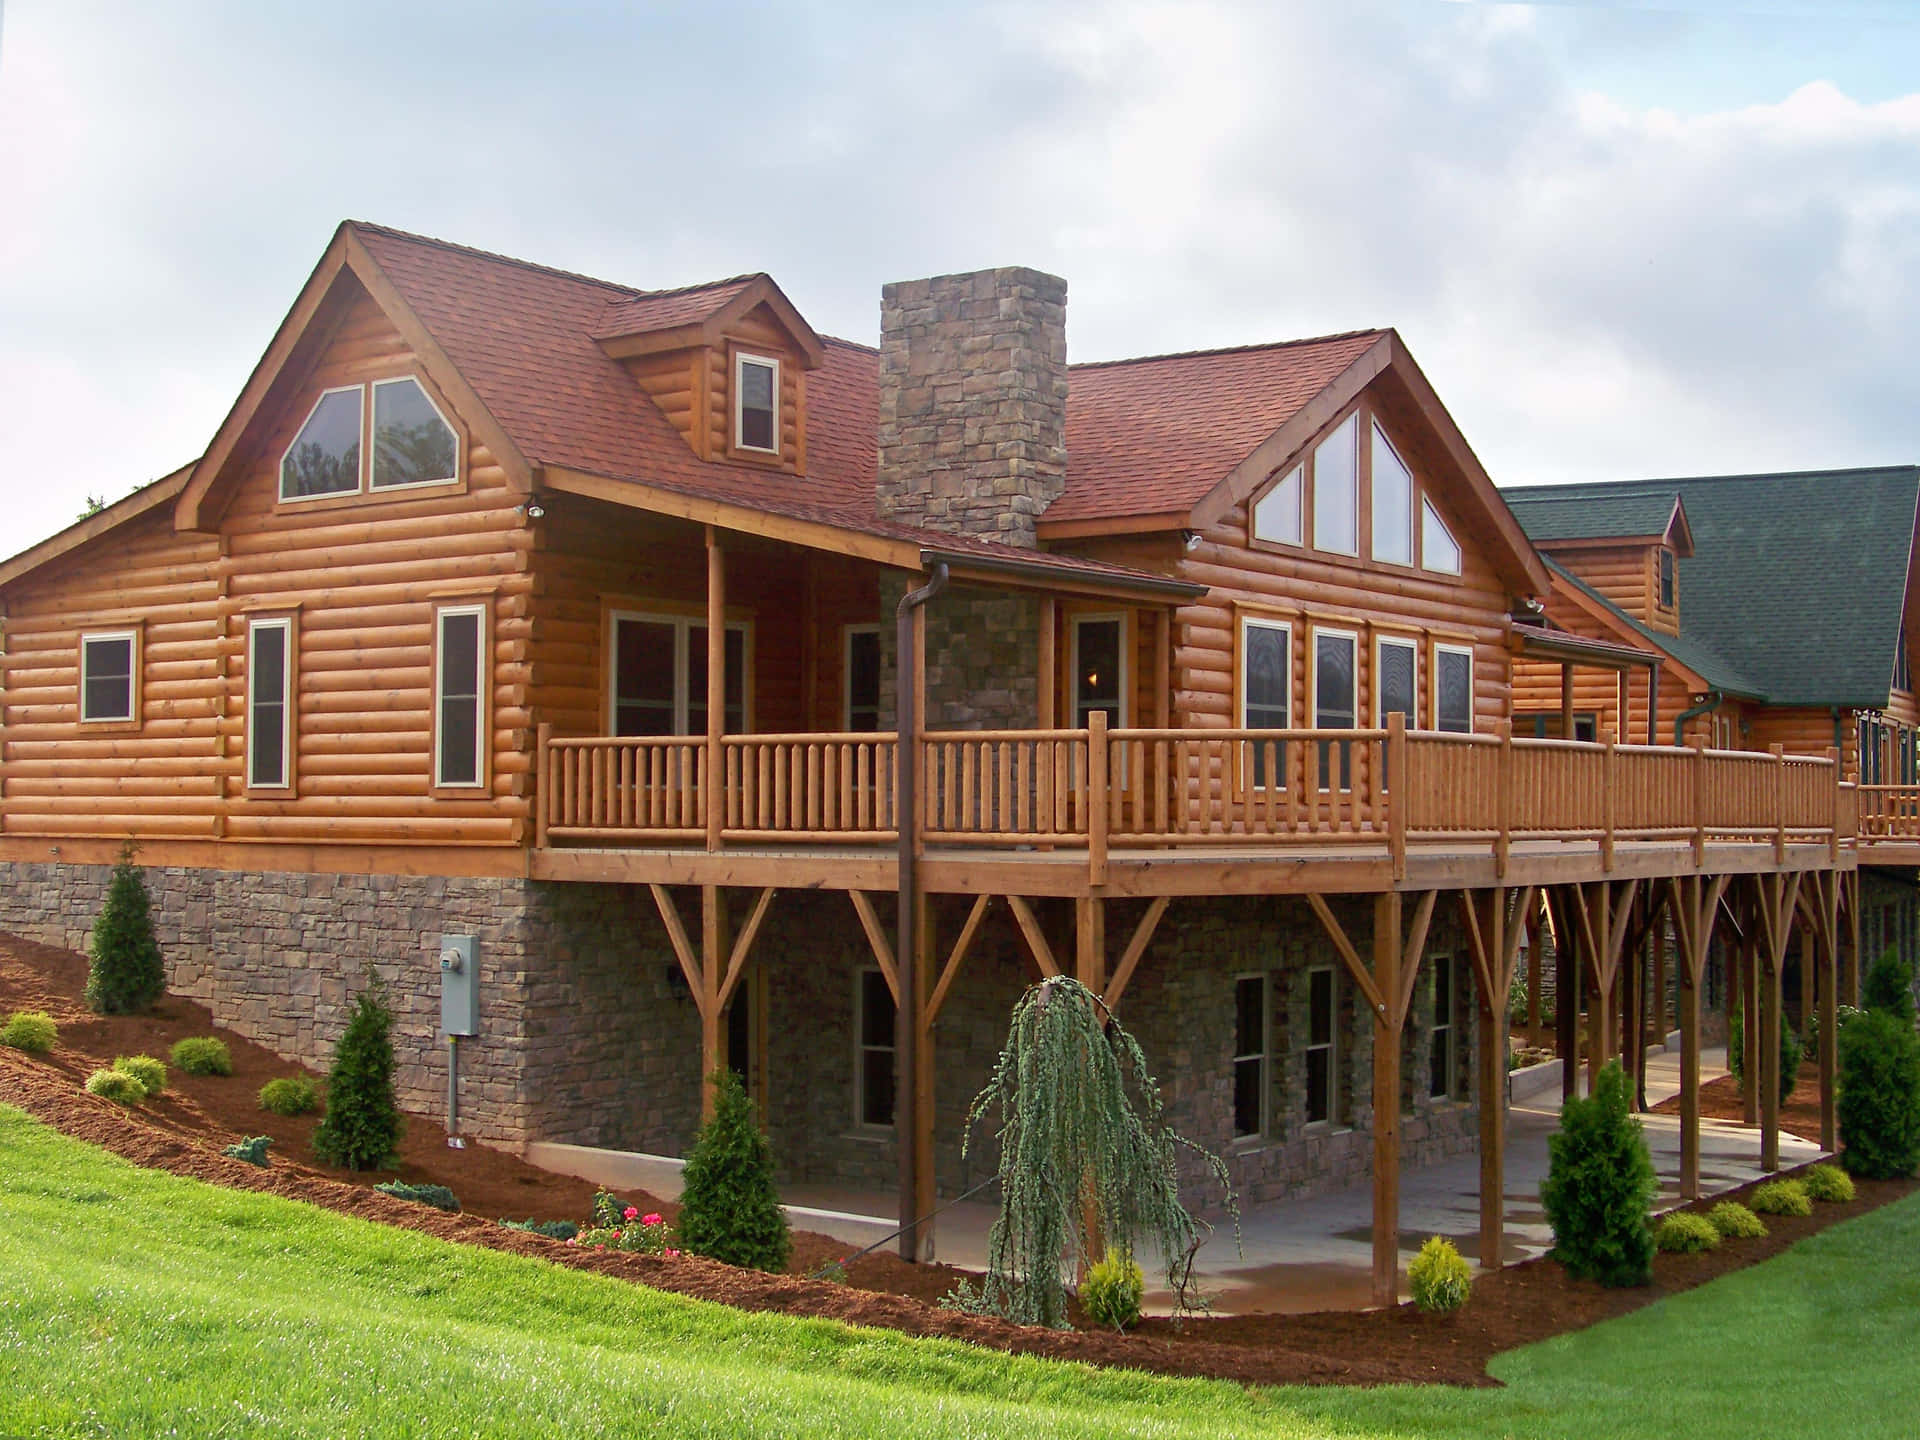 Enjoy a stay at a traditional log cabin